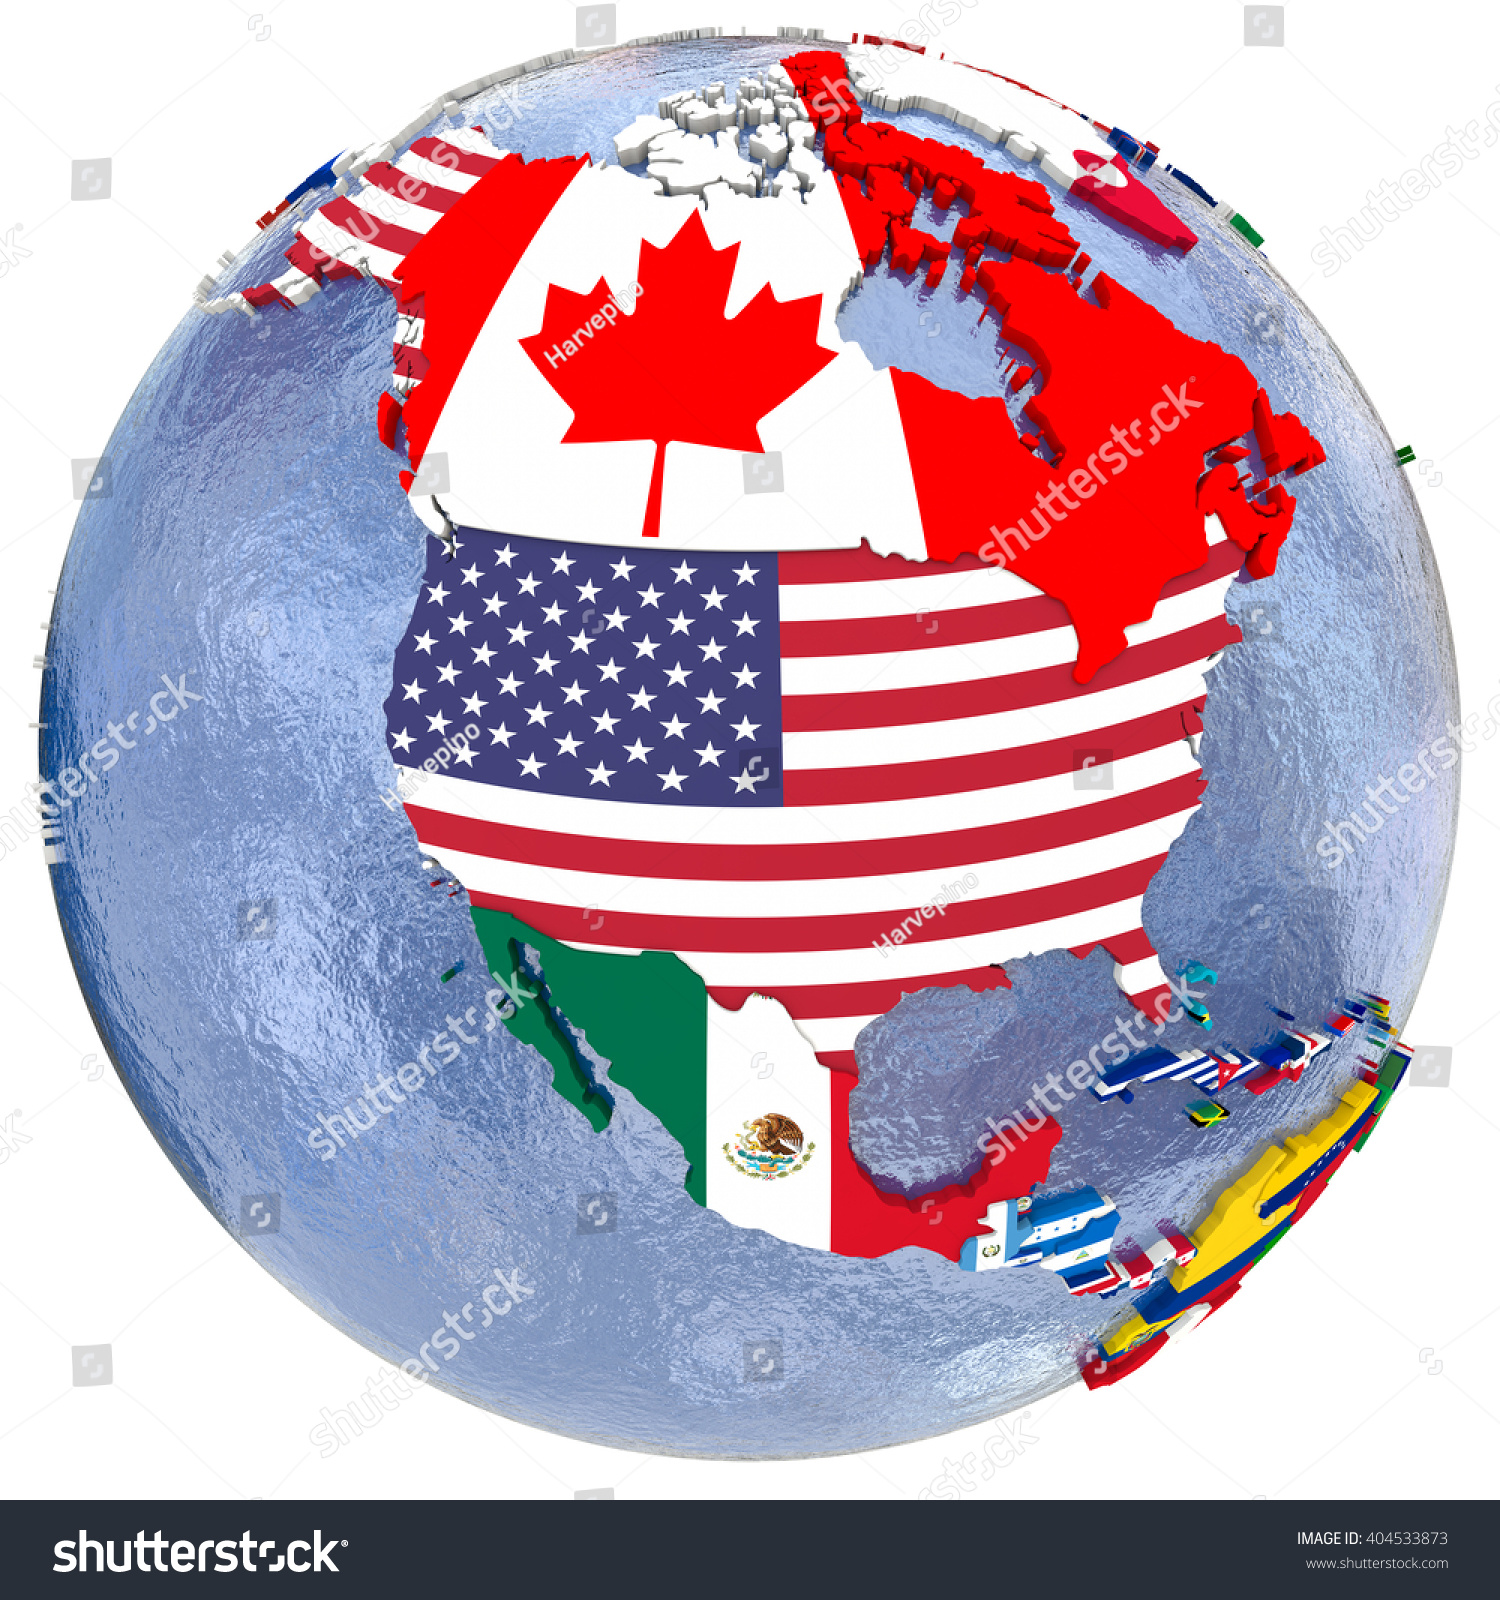 Political Map Of North America With Each Country Represented By Its